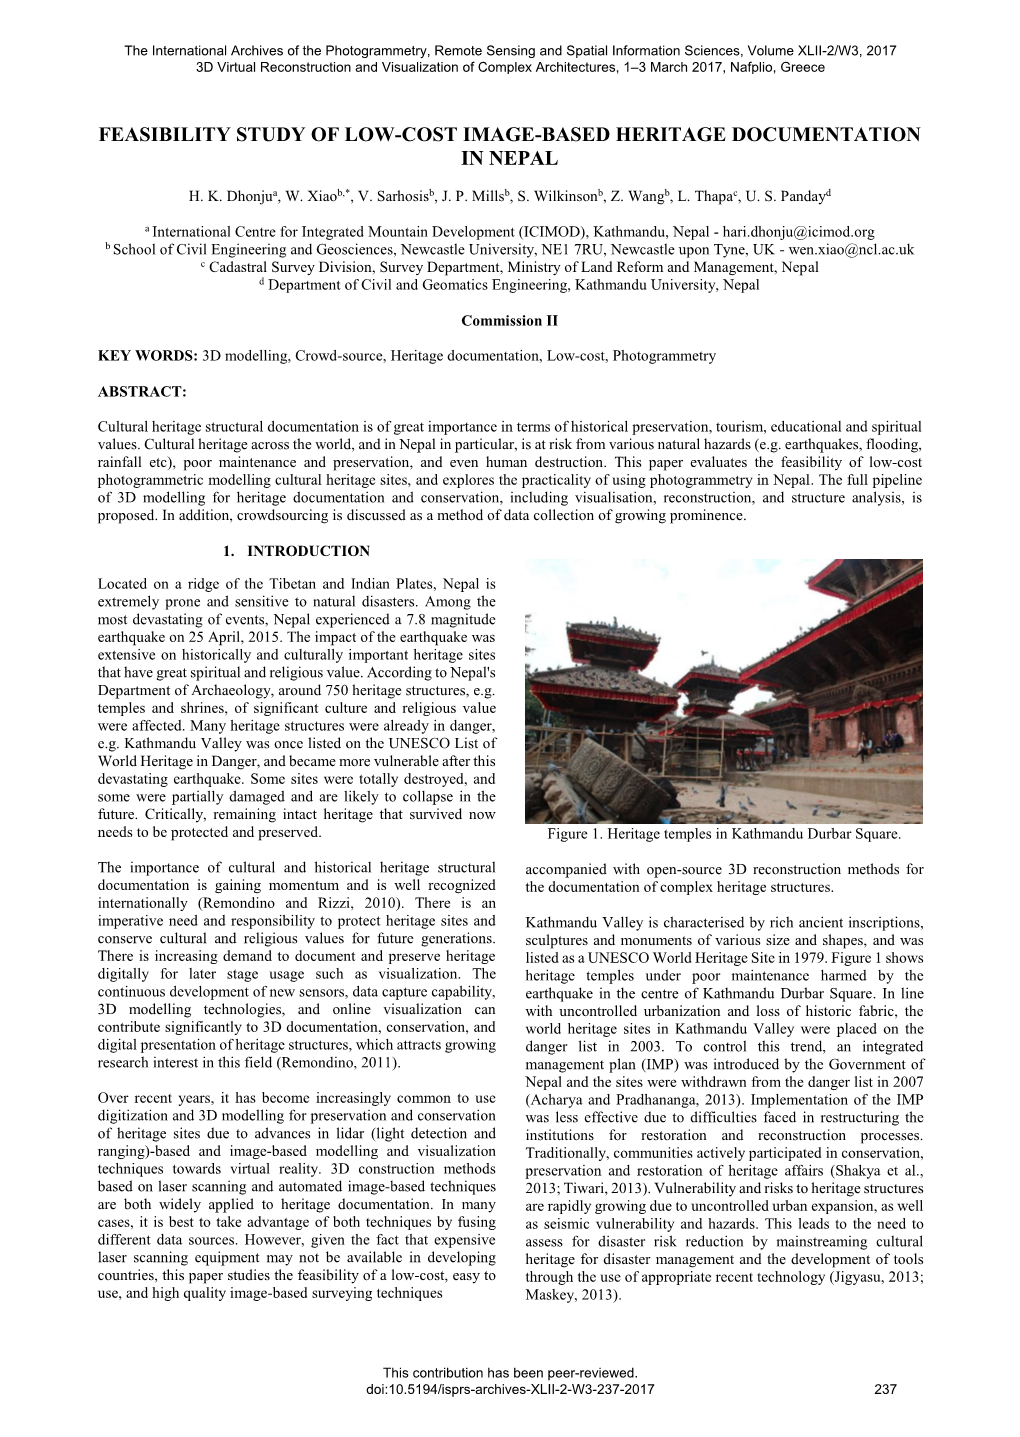 Feasibility Study of Low-Cost Image-Based Heritage Documentation in Nepal